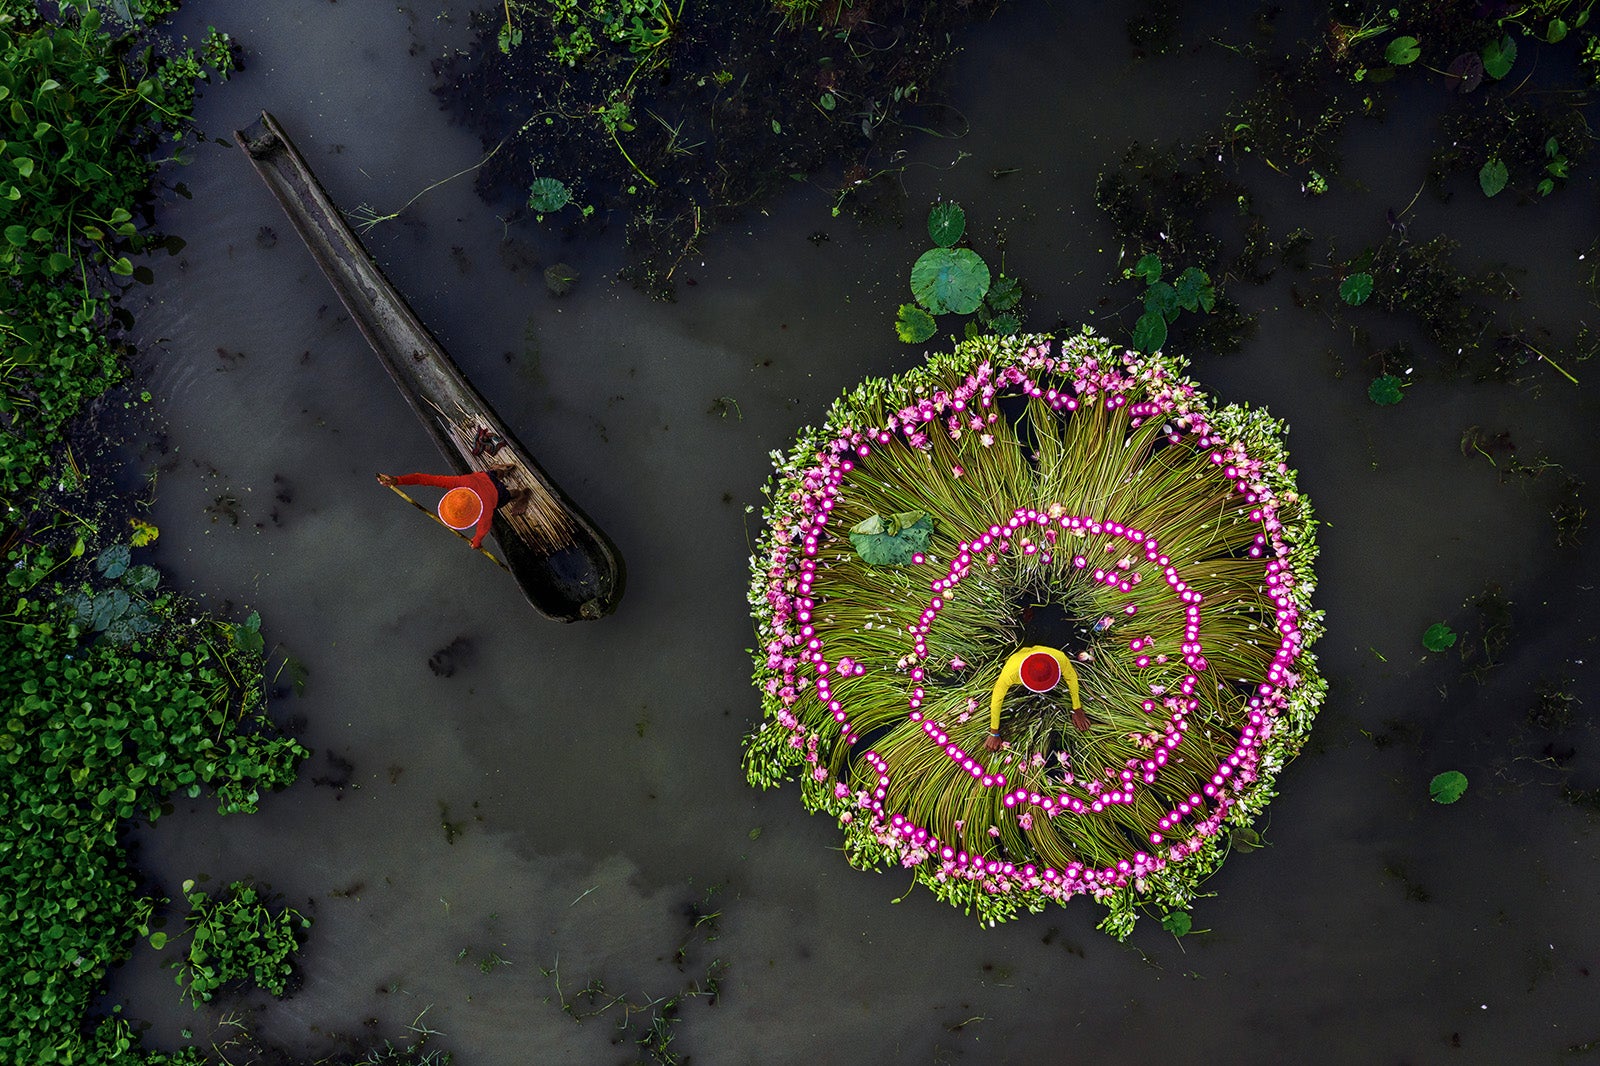 rmets weather photographer of the year Barrackpore, West Bengal, India harvesting water lilies